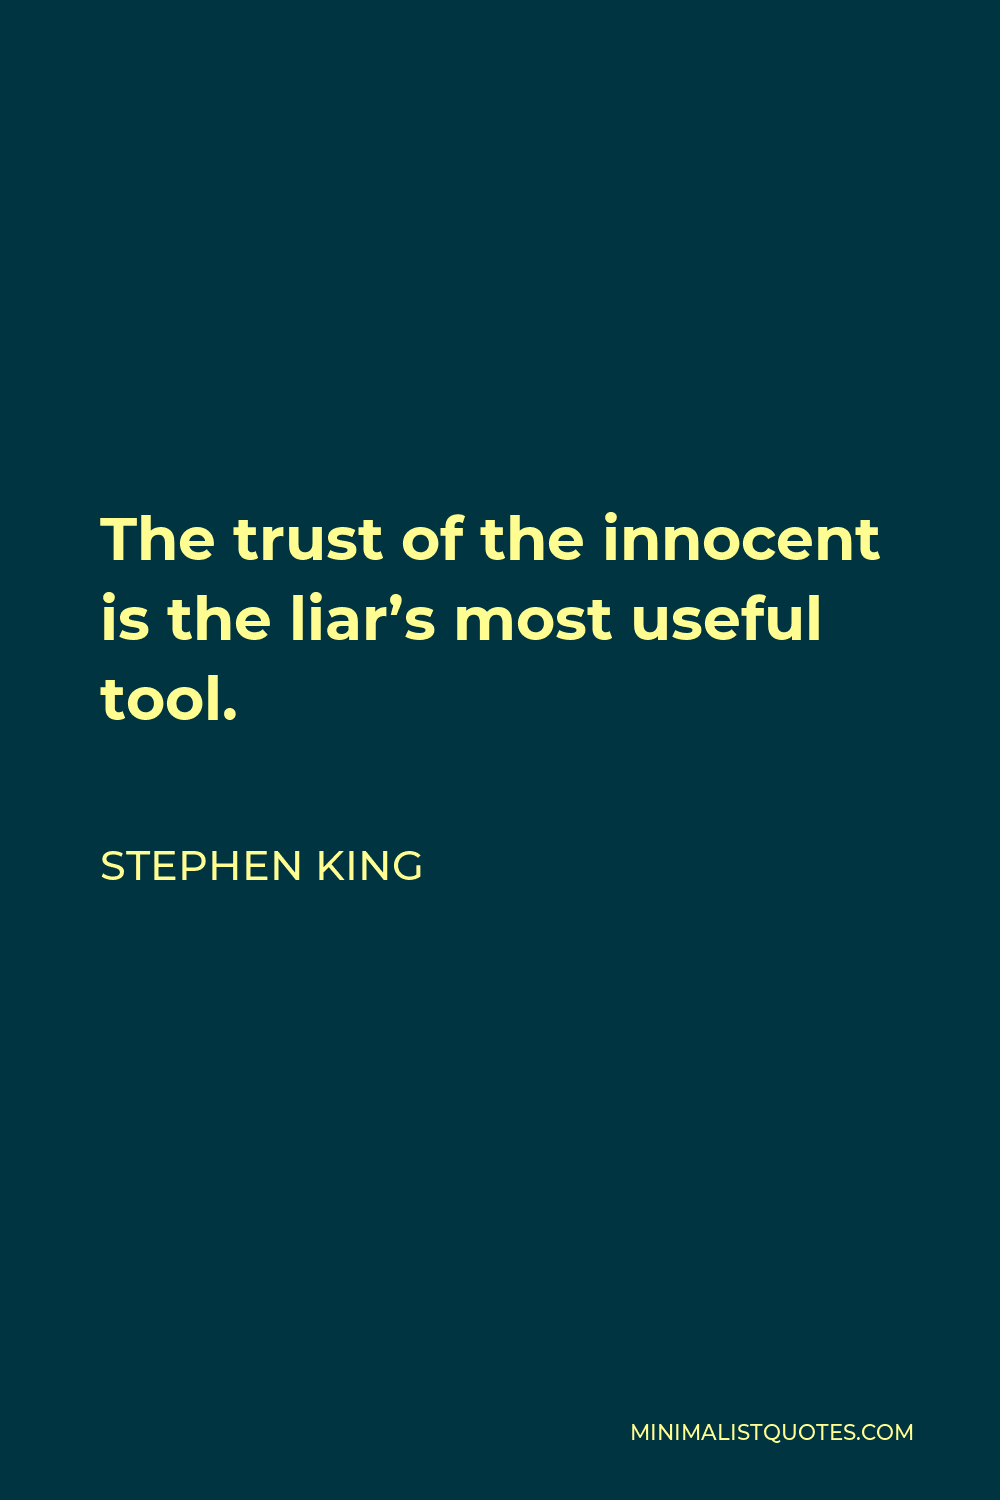 Stephen King Quote - The trust of the innocent is the liar’s most useful tool.